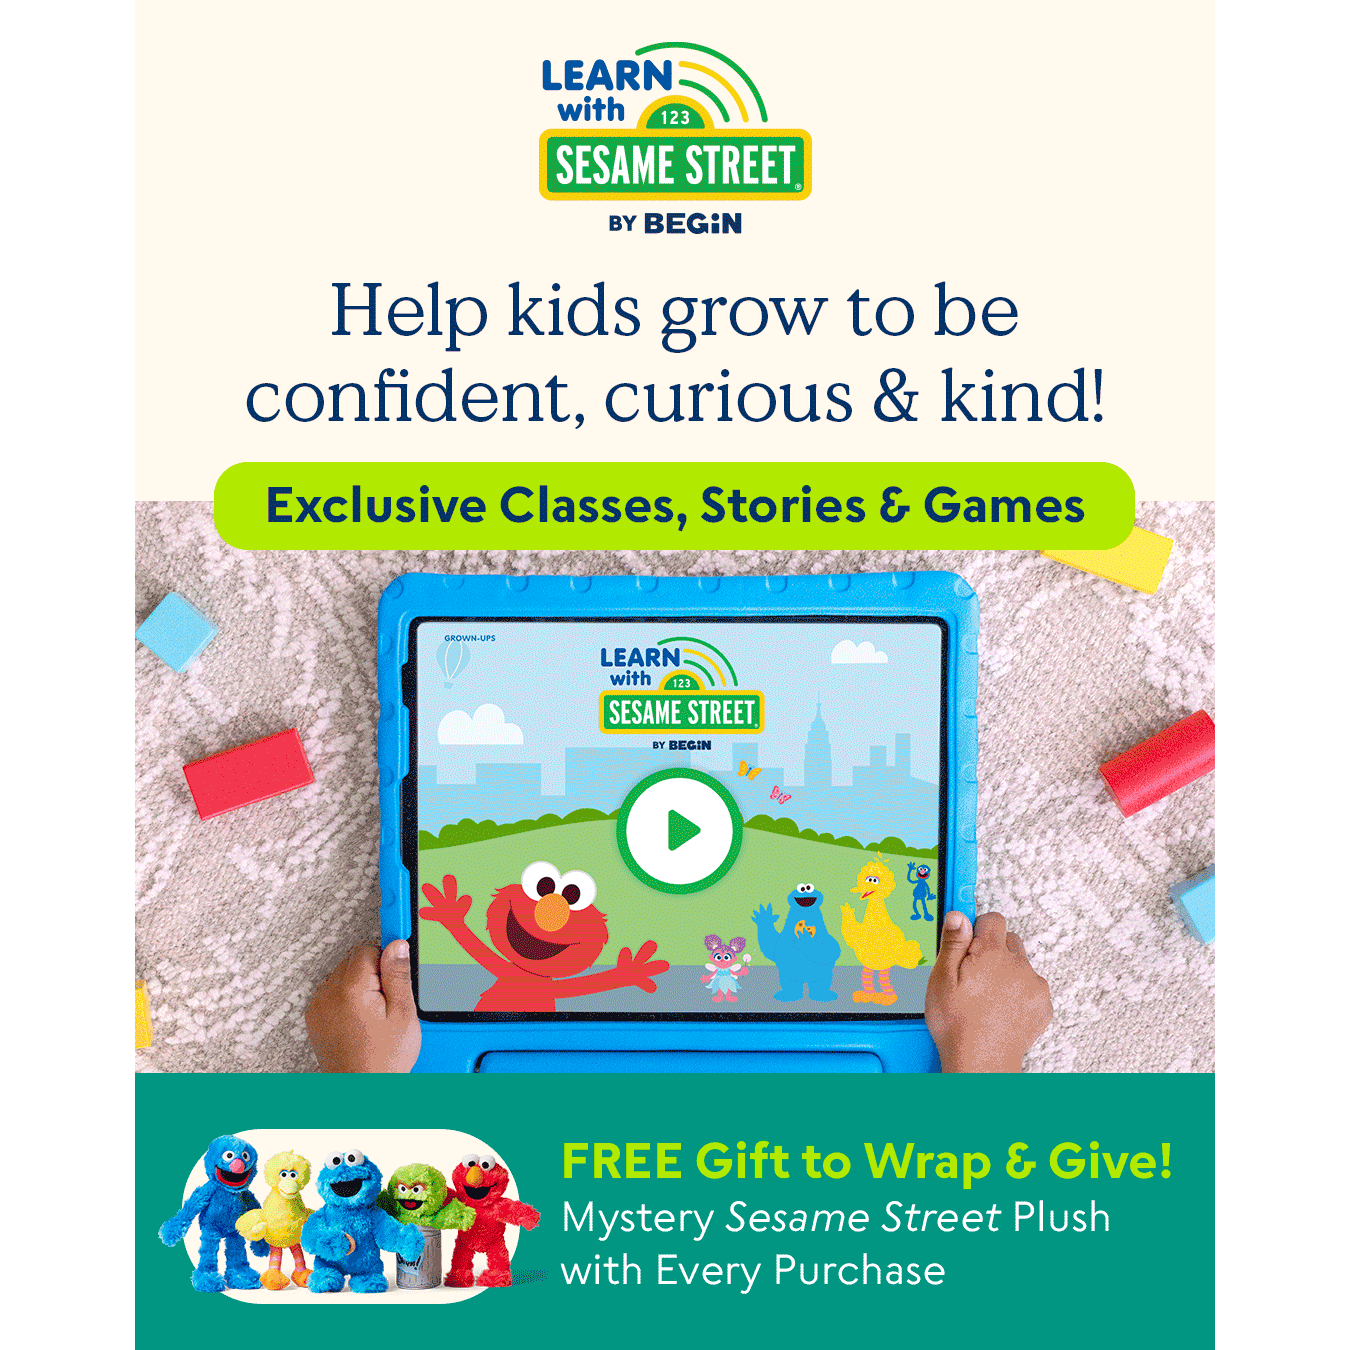 Learn with Sesame Street - Help kids grow to be confident, curious & kind!<br>Exclusive Classes, Stories & Games<br>Identifying Emotions<br>Managing Big Feelings<br>Building Social Skills<br>FREE Gift to Wrap & Give!<br>Mystery Sesame Street Plush with Every Purchase